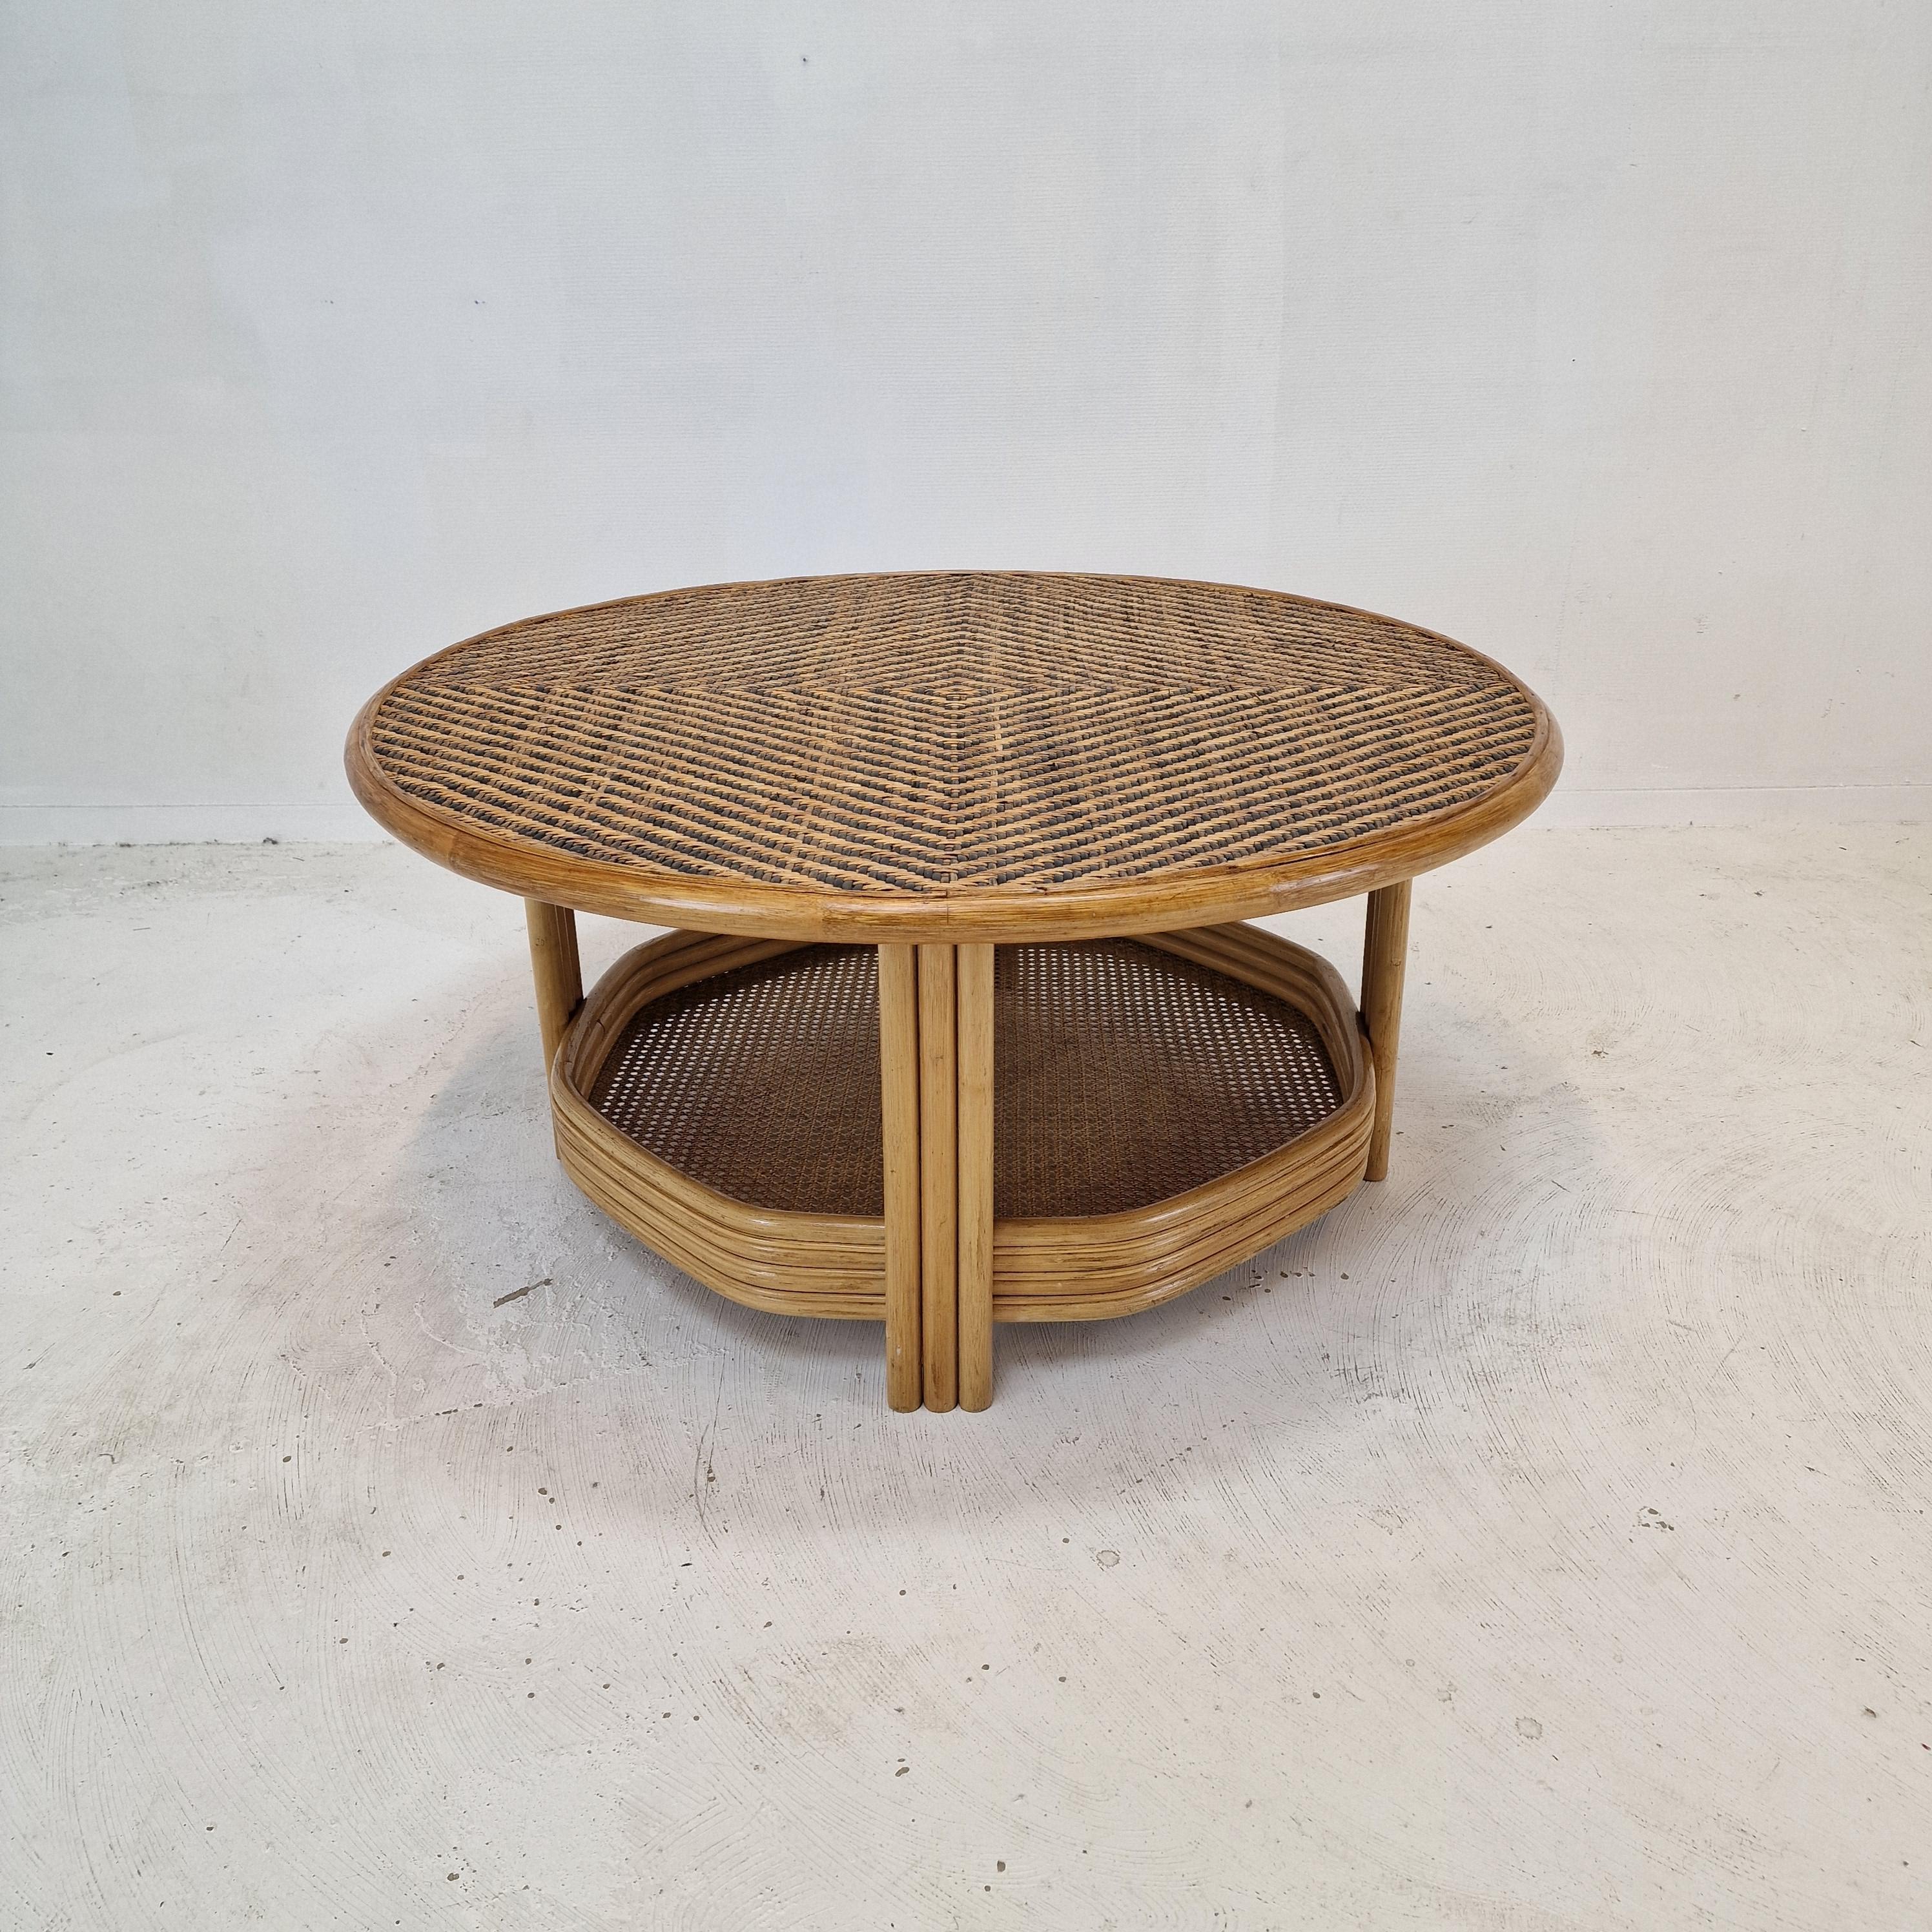 Lovely round coffee or side table, fabricated in Italy in the 1970s. 

The base is made of bamboe.
The plates are made of rattan and wicker.

It is possible to remove the upper plate to use it like a tray.

This one of a kind table is hand